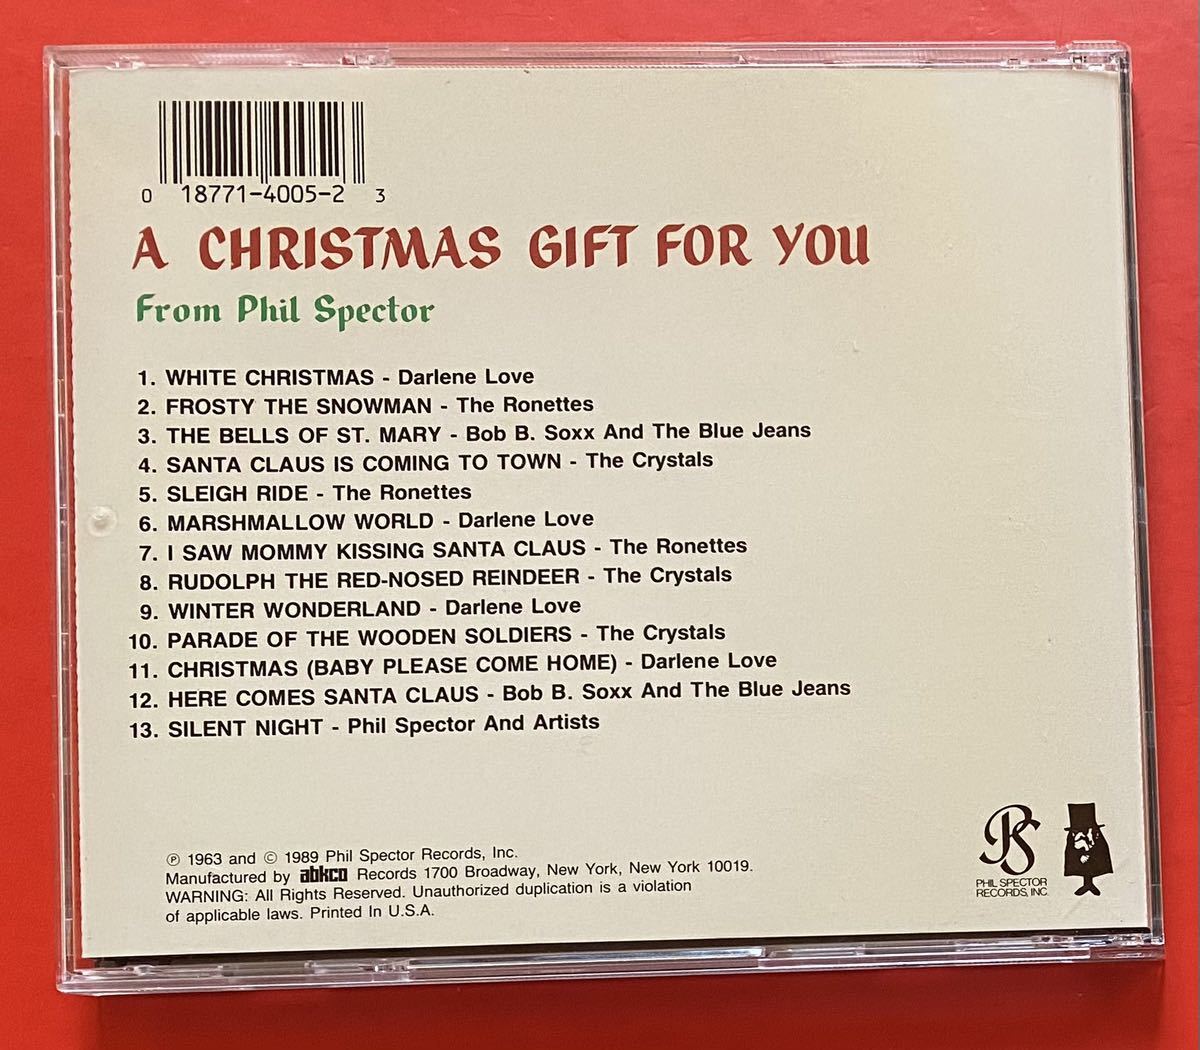 【CD】PHIL SPECTOR「A CHRISTMAS GIFT FOR YOU」フィル・スペクター 輸入盤 盤面良好 [08170187]_画像2